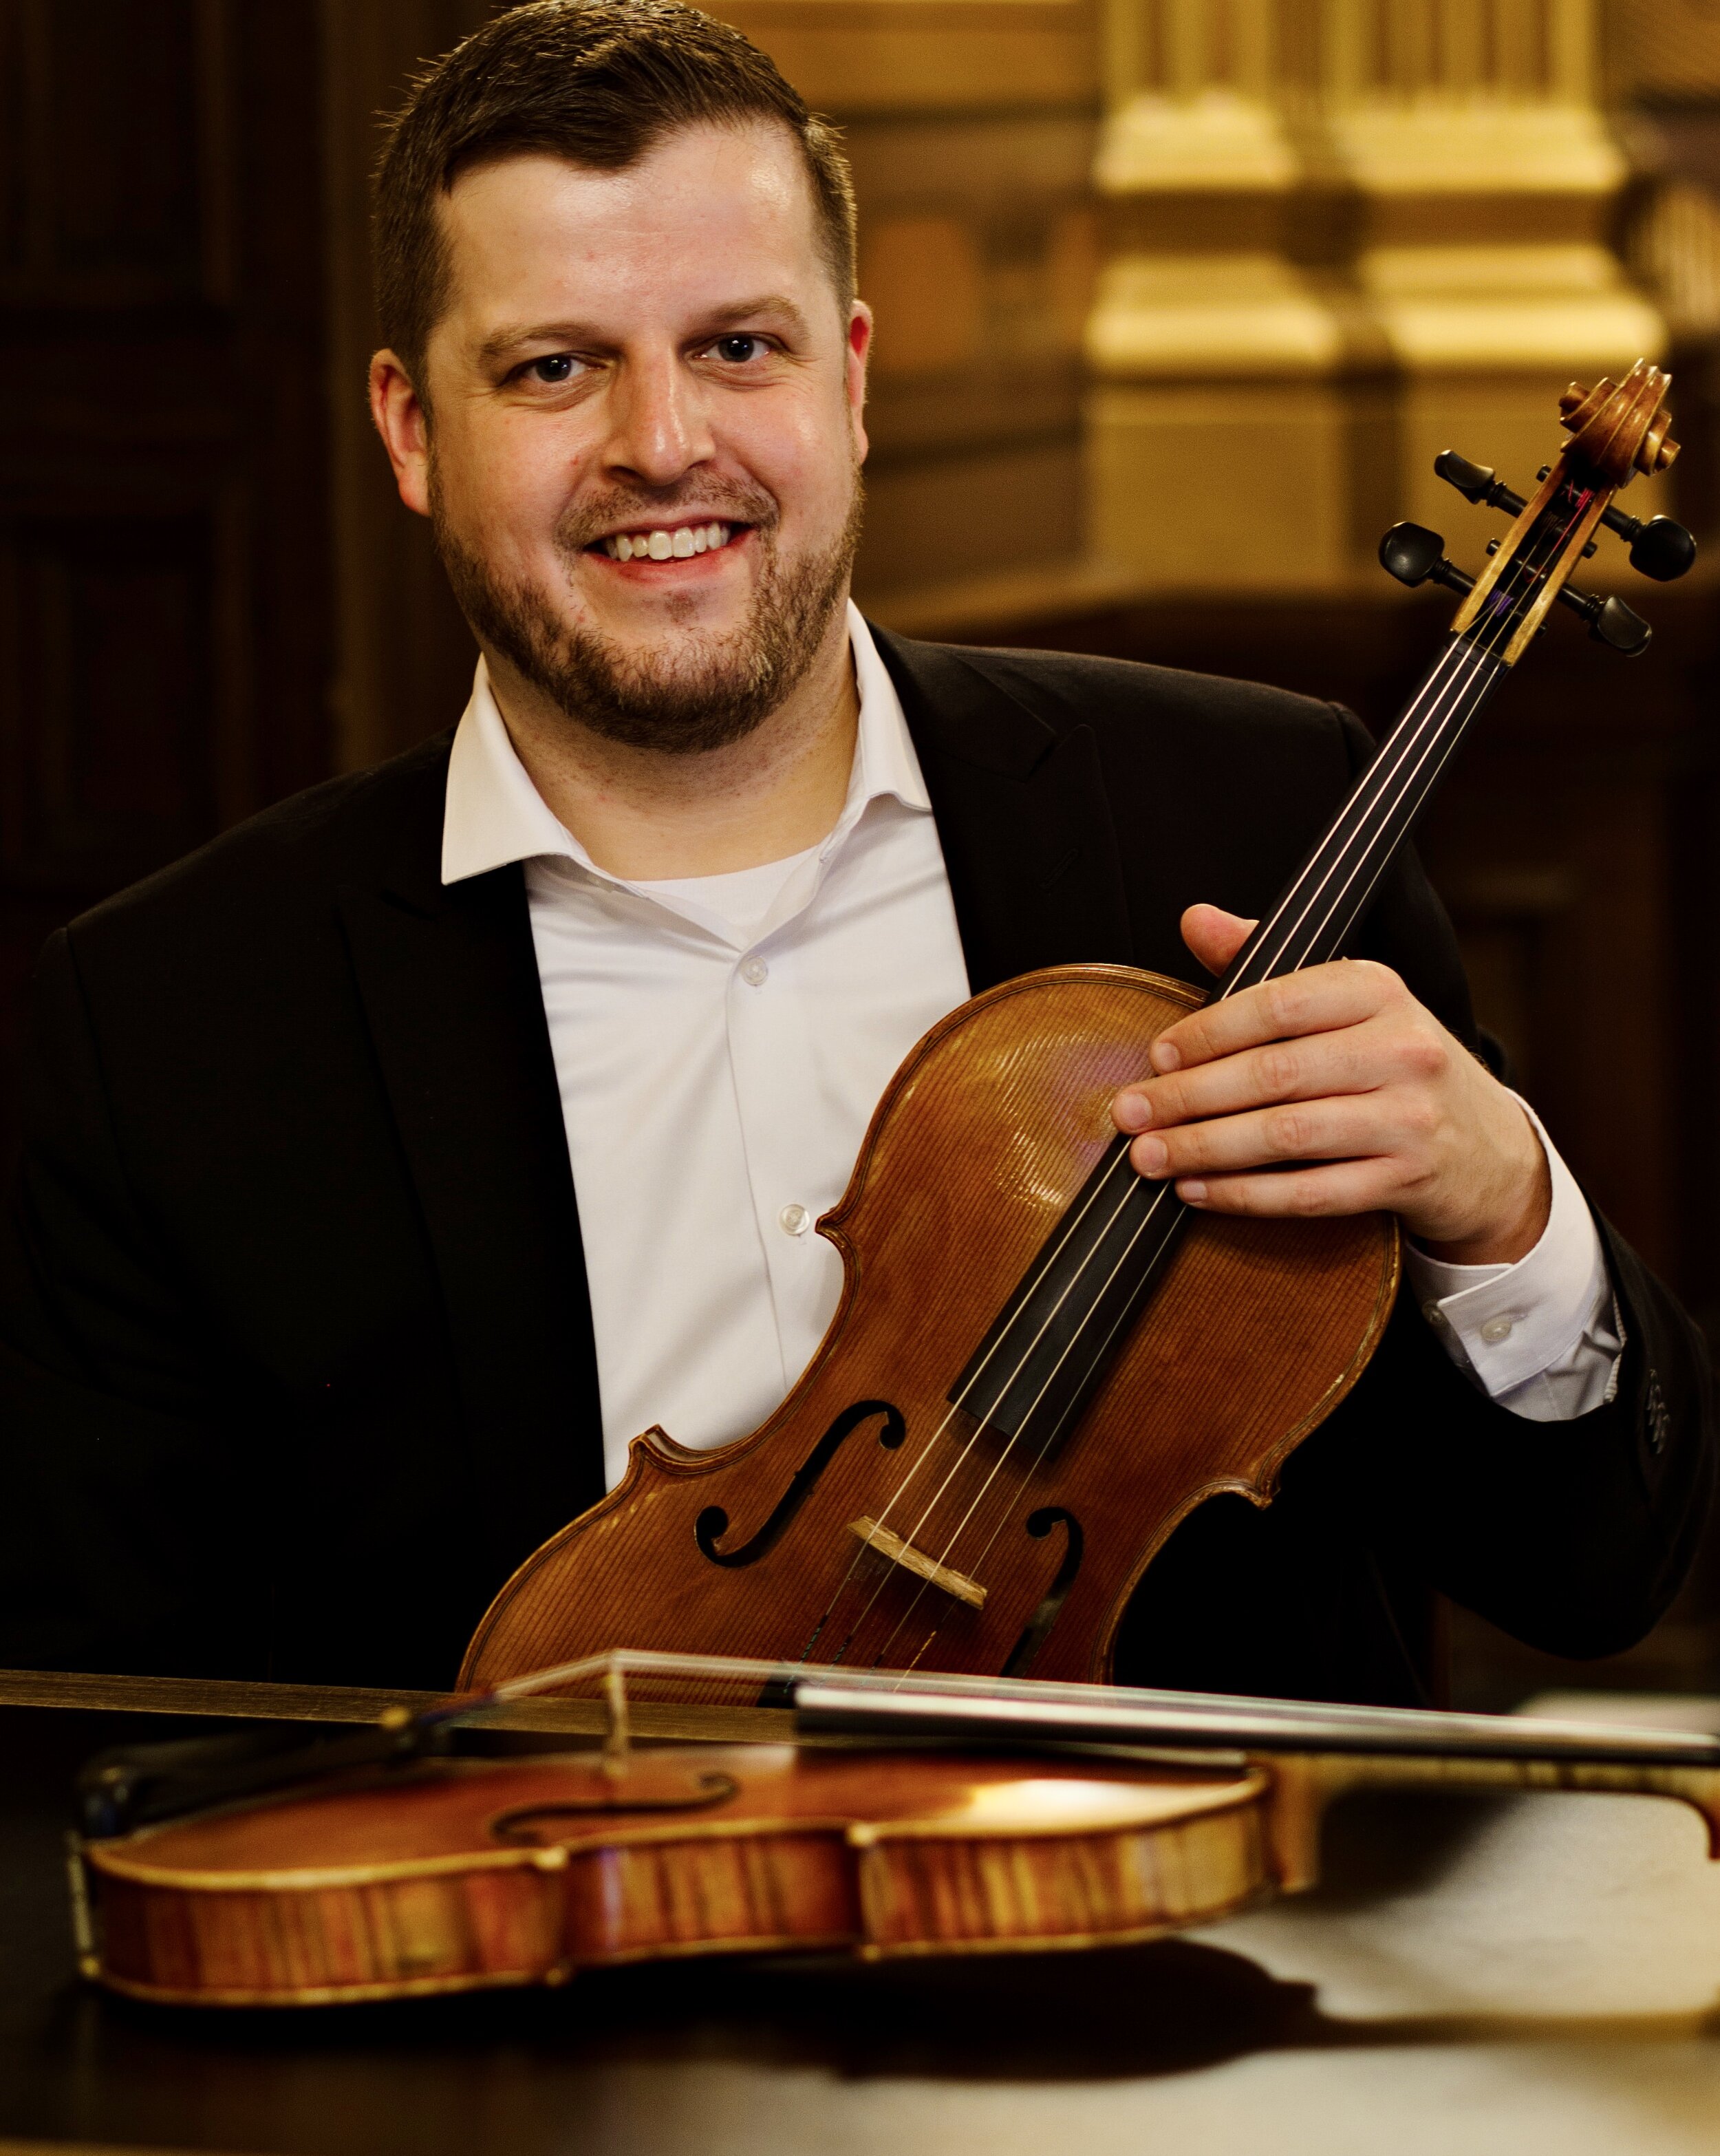 Department of Music presents 'Bach, Brahms, and the Beatles' Featuring Faculty Member Matt Pickart